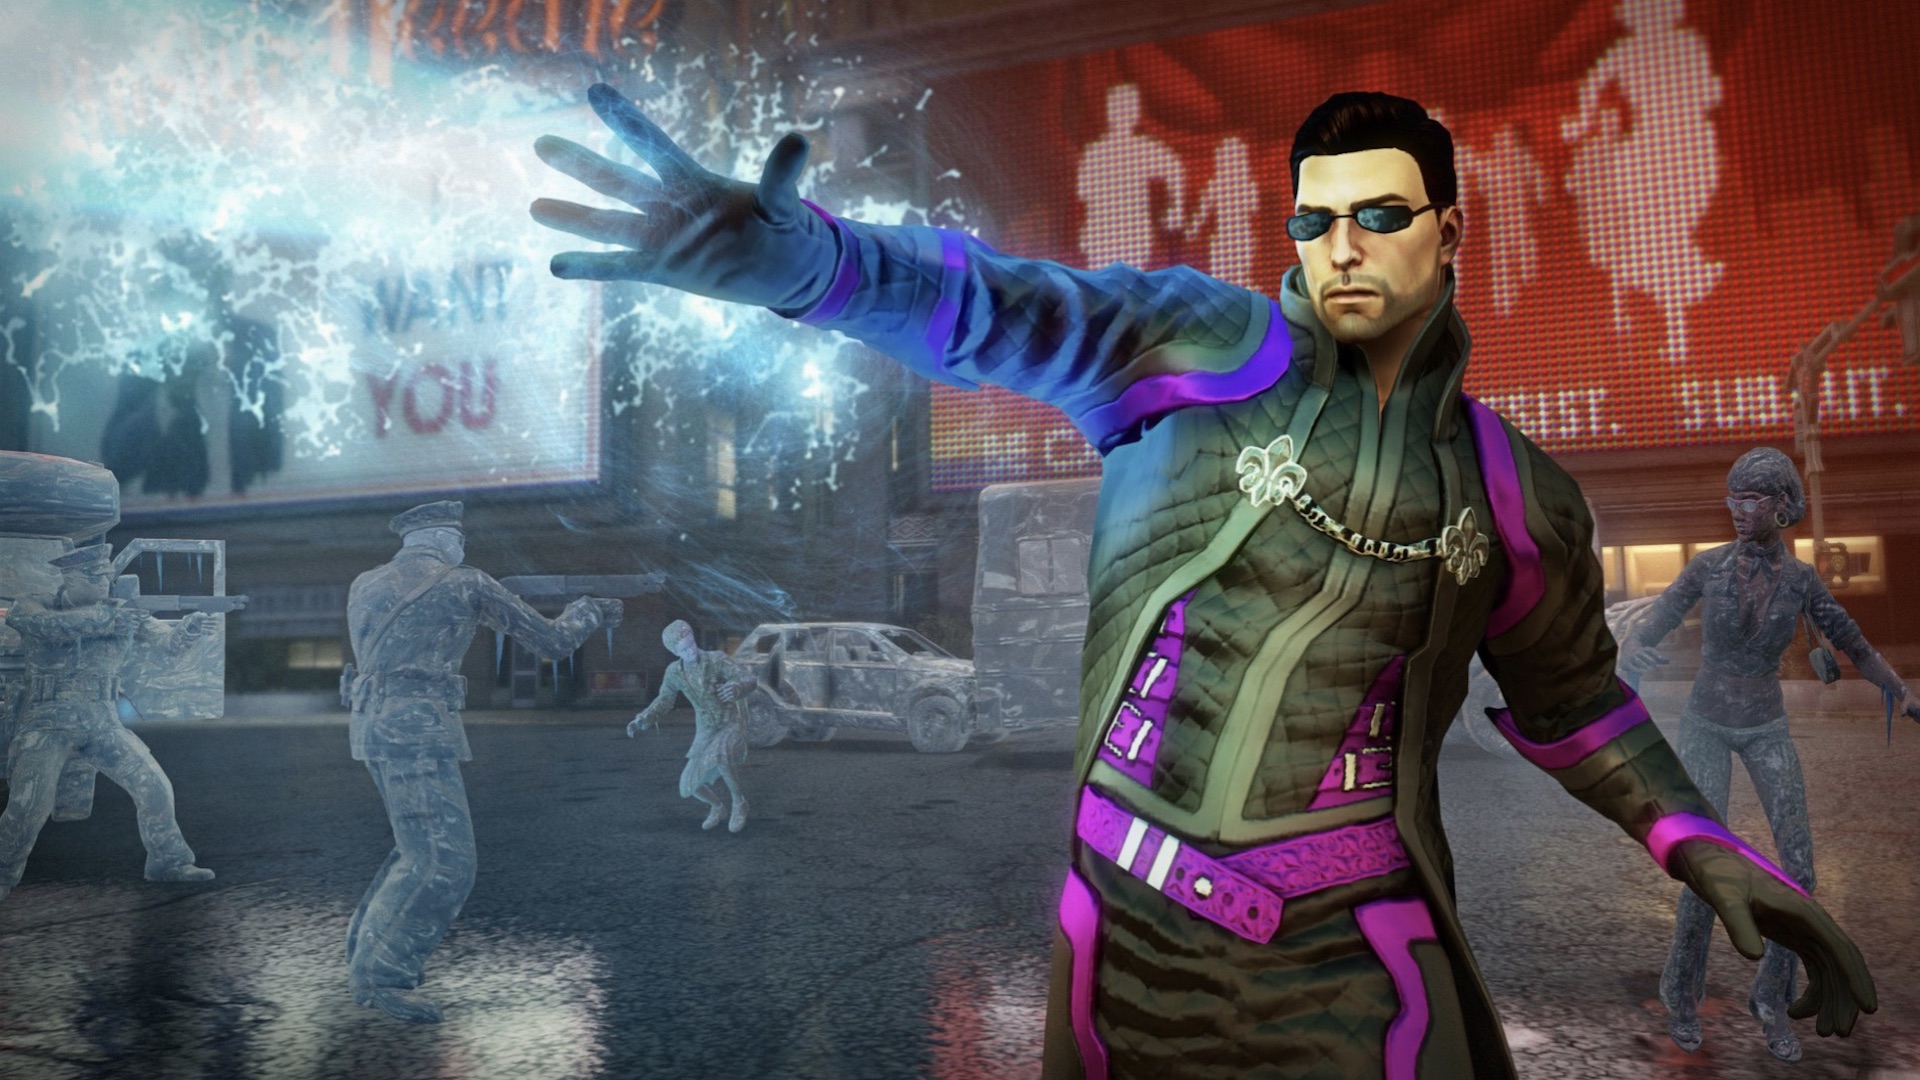 A character from Saints Row 4 fires ice from their hands